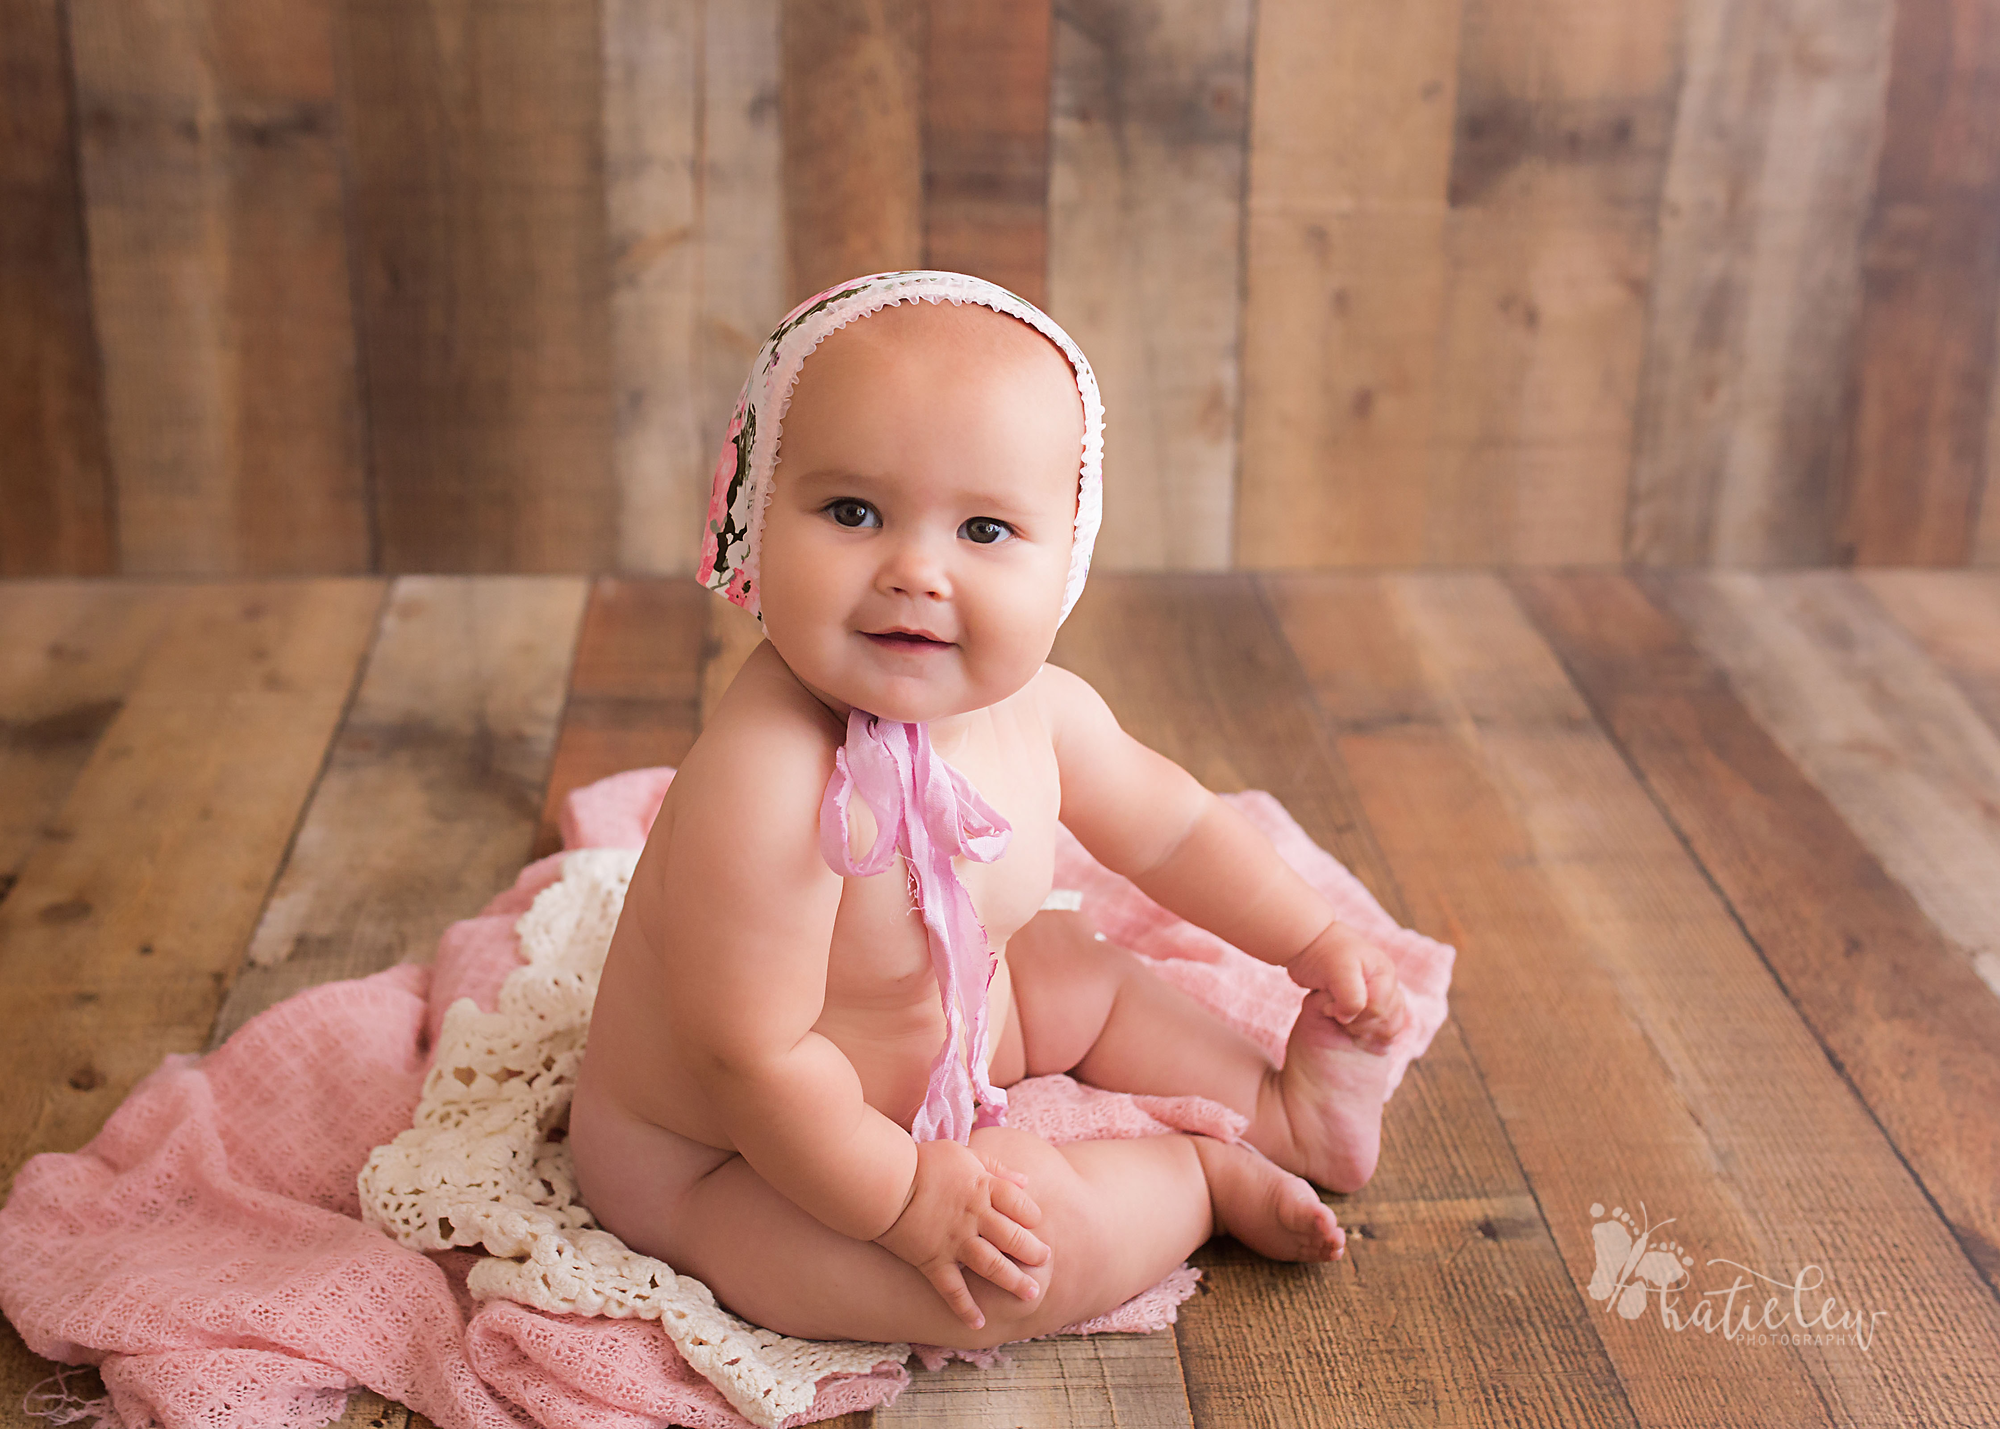 6 month baby naked except for a cute floral bonnet